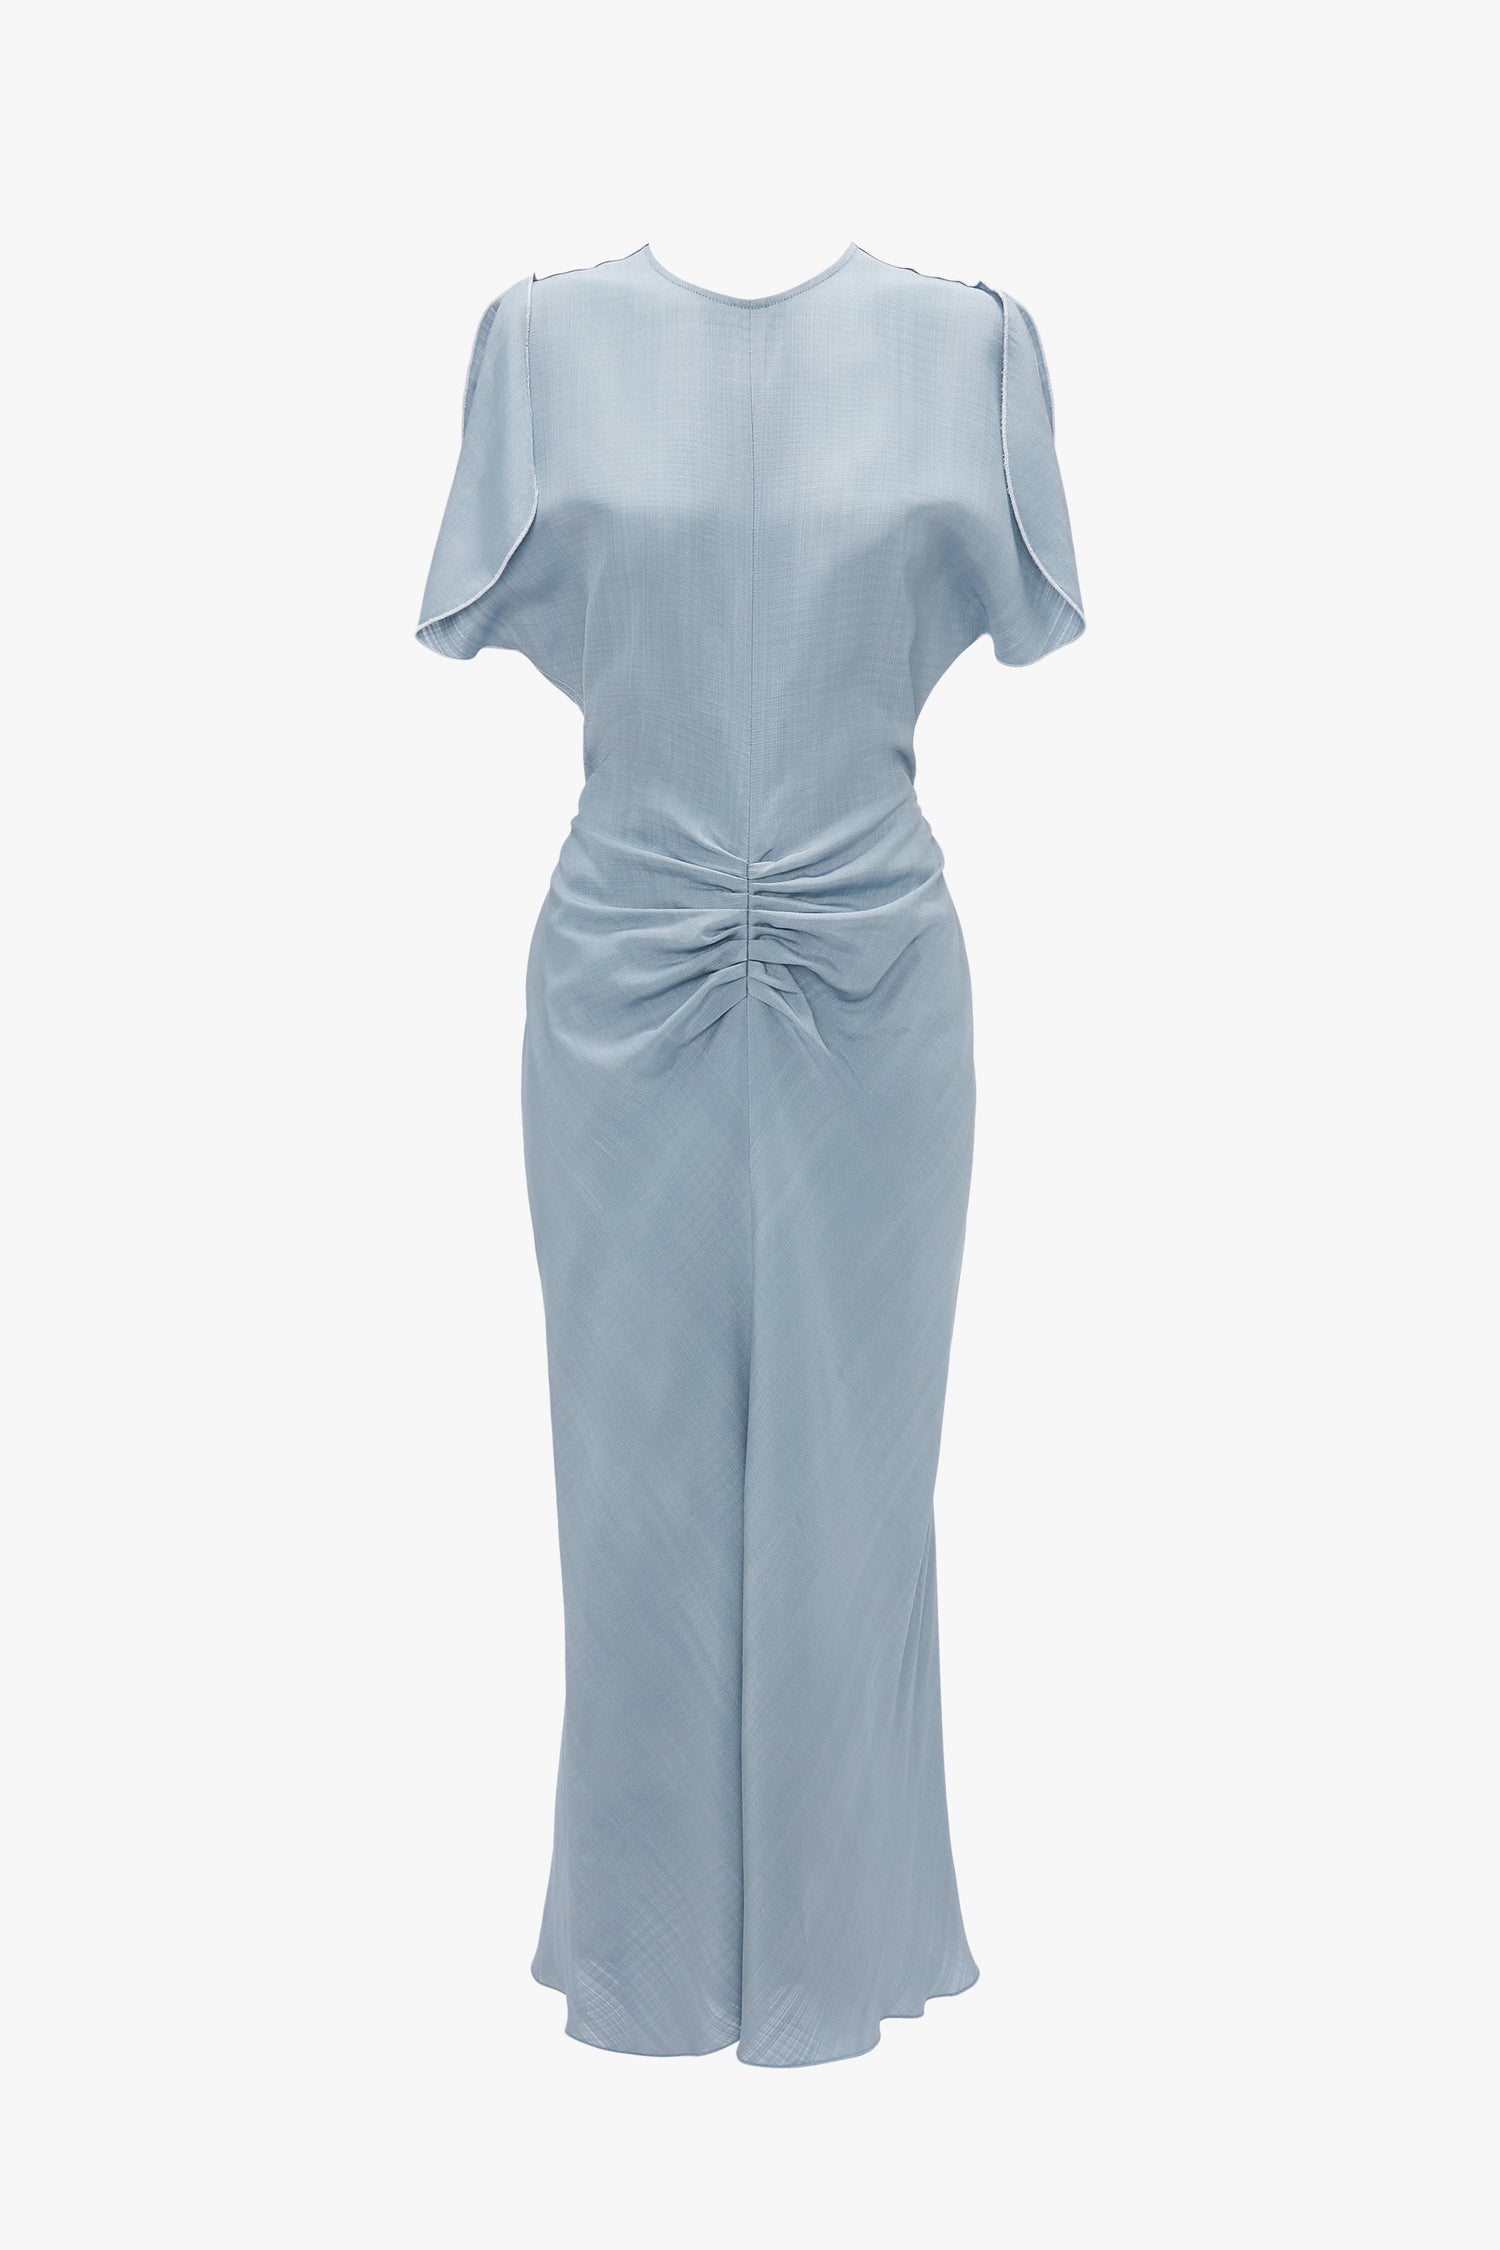 Light blue Exclusive Gathered Waist Midi Dress In Pebble with short sleeves and a twisted knot detail at the gathered waist, displayed against a white background by Victoria Beckham.